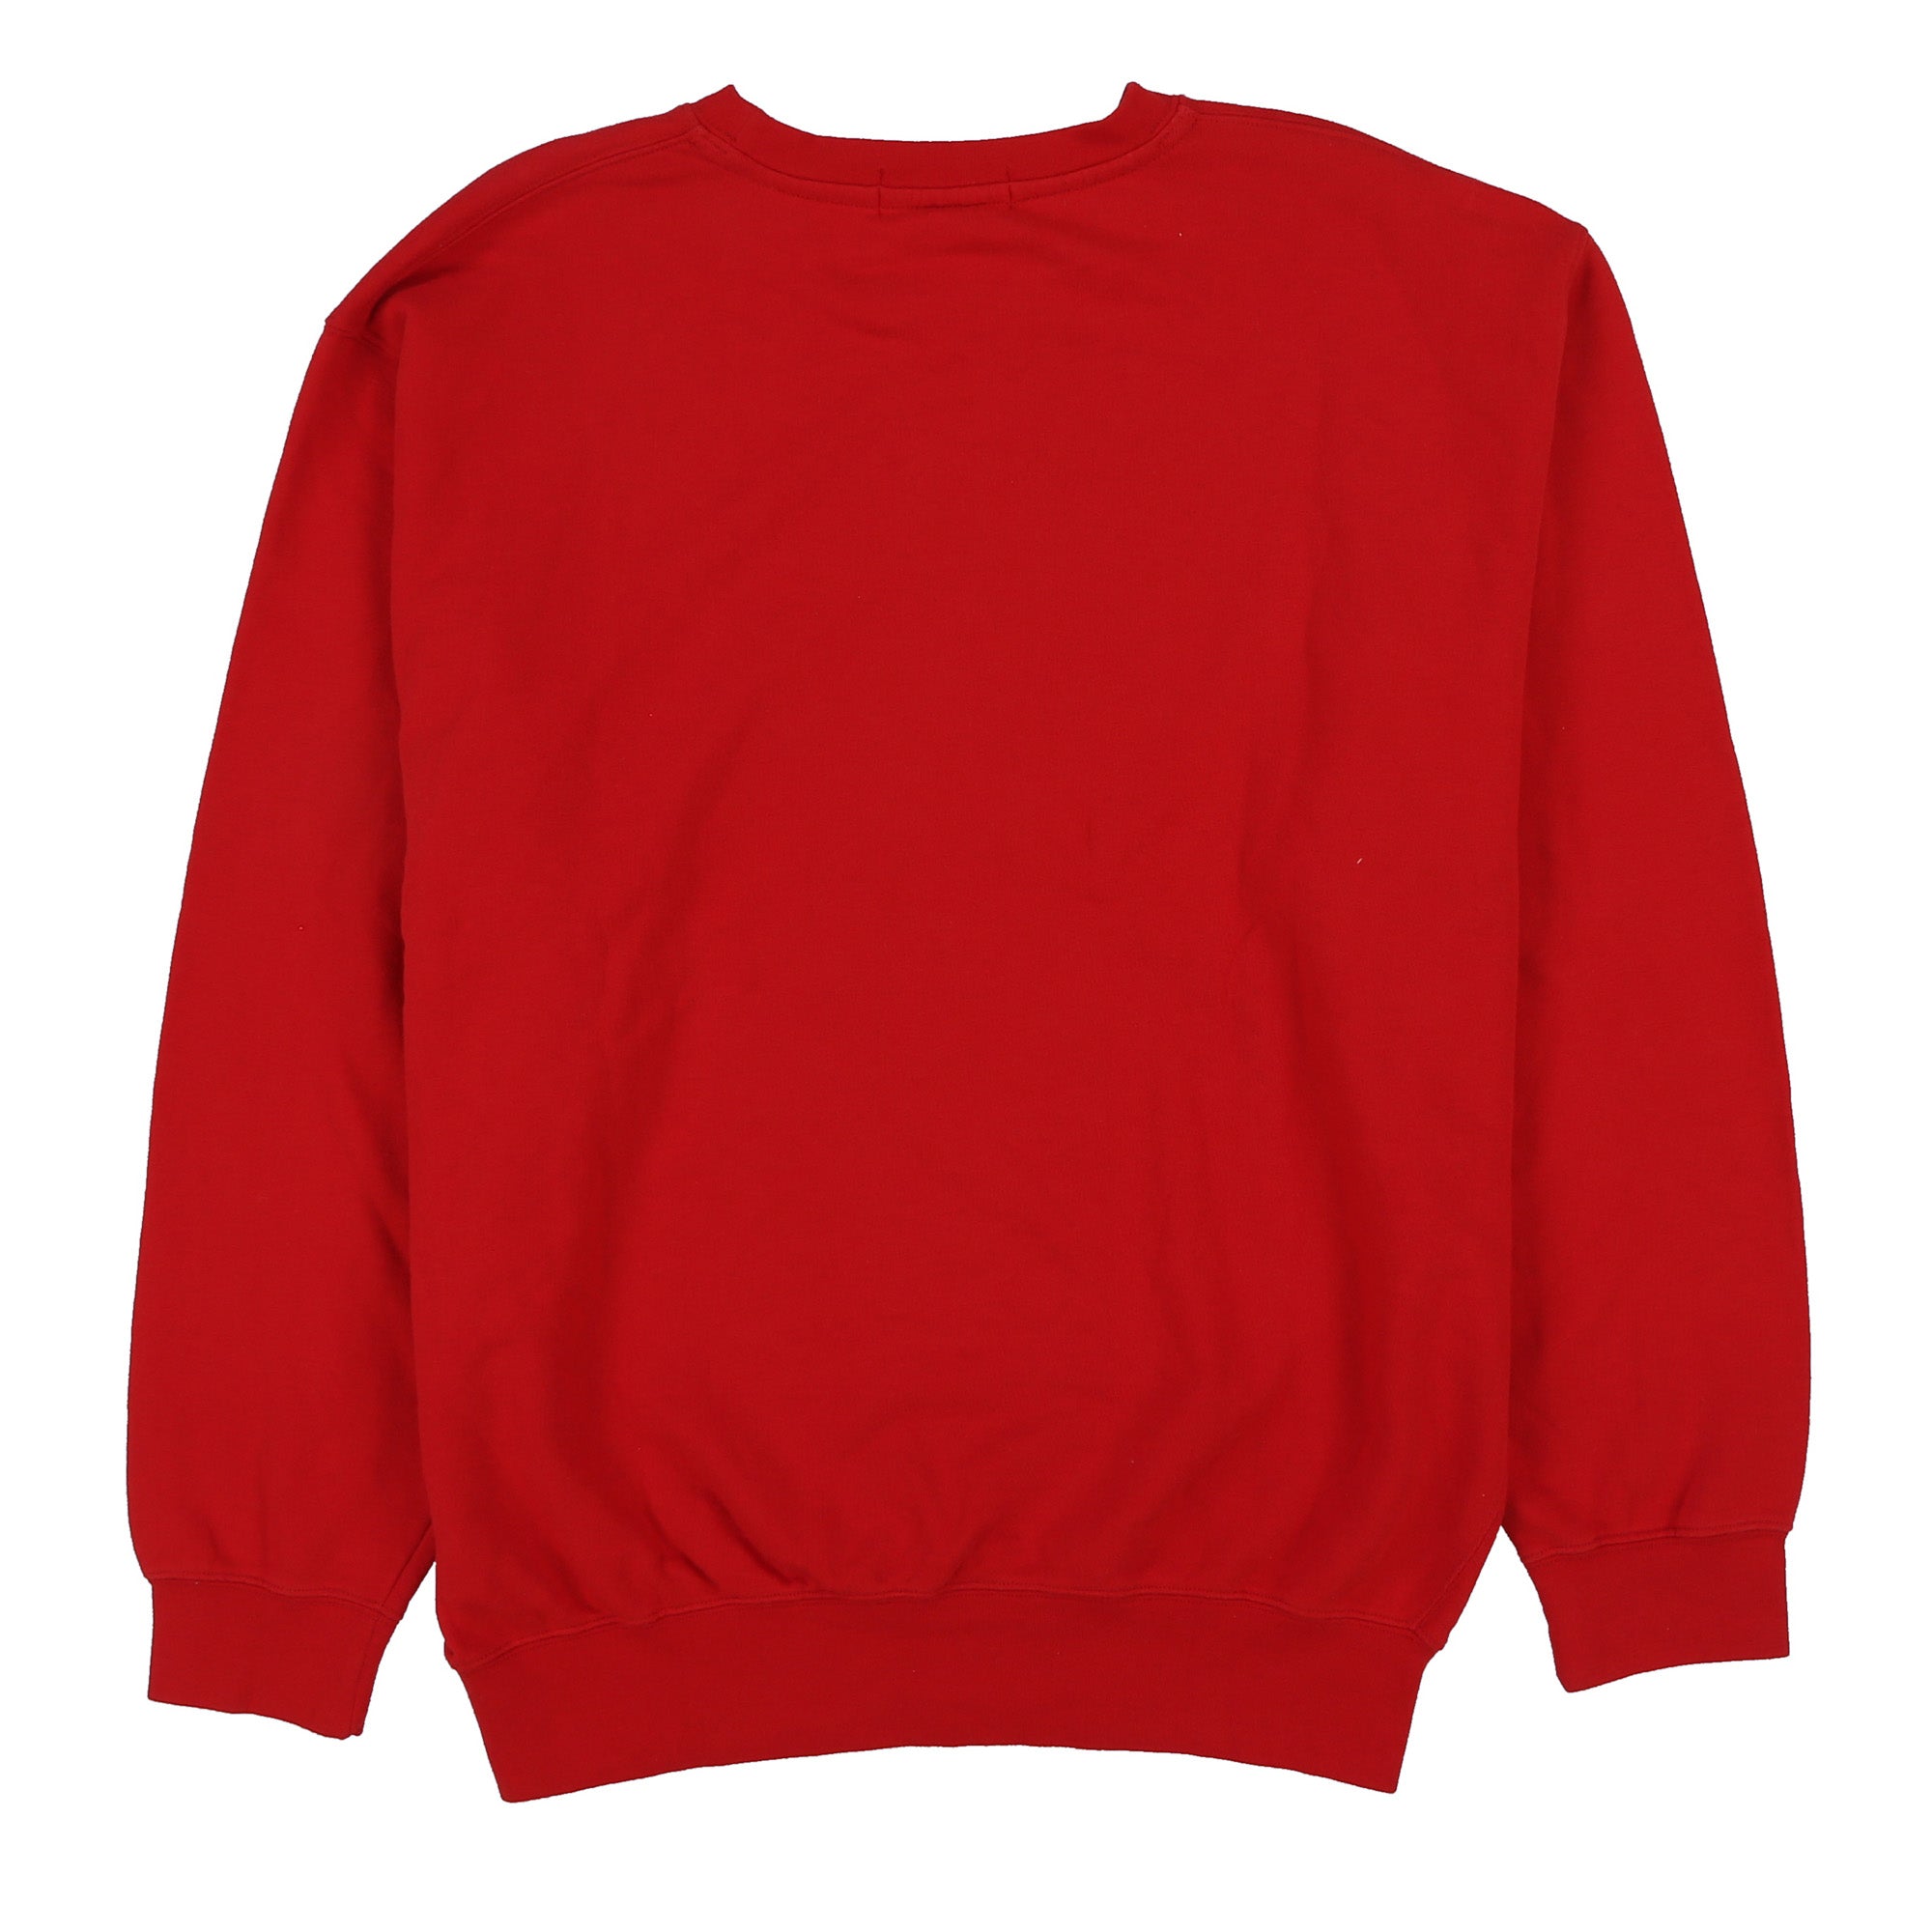 POLO SPELL OUT USA FLAG CREWNECK // RED